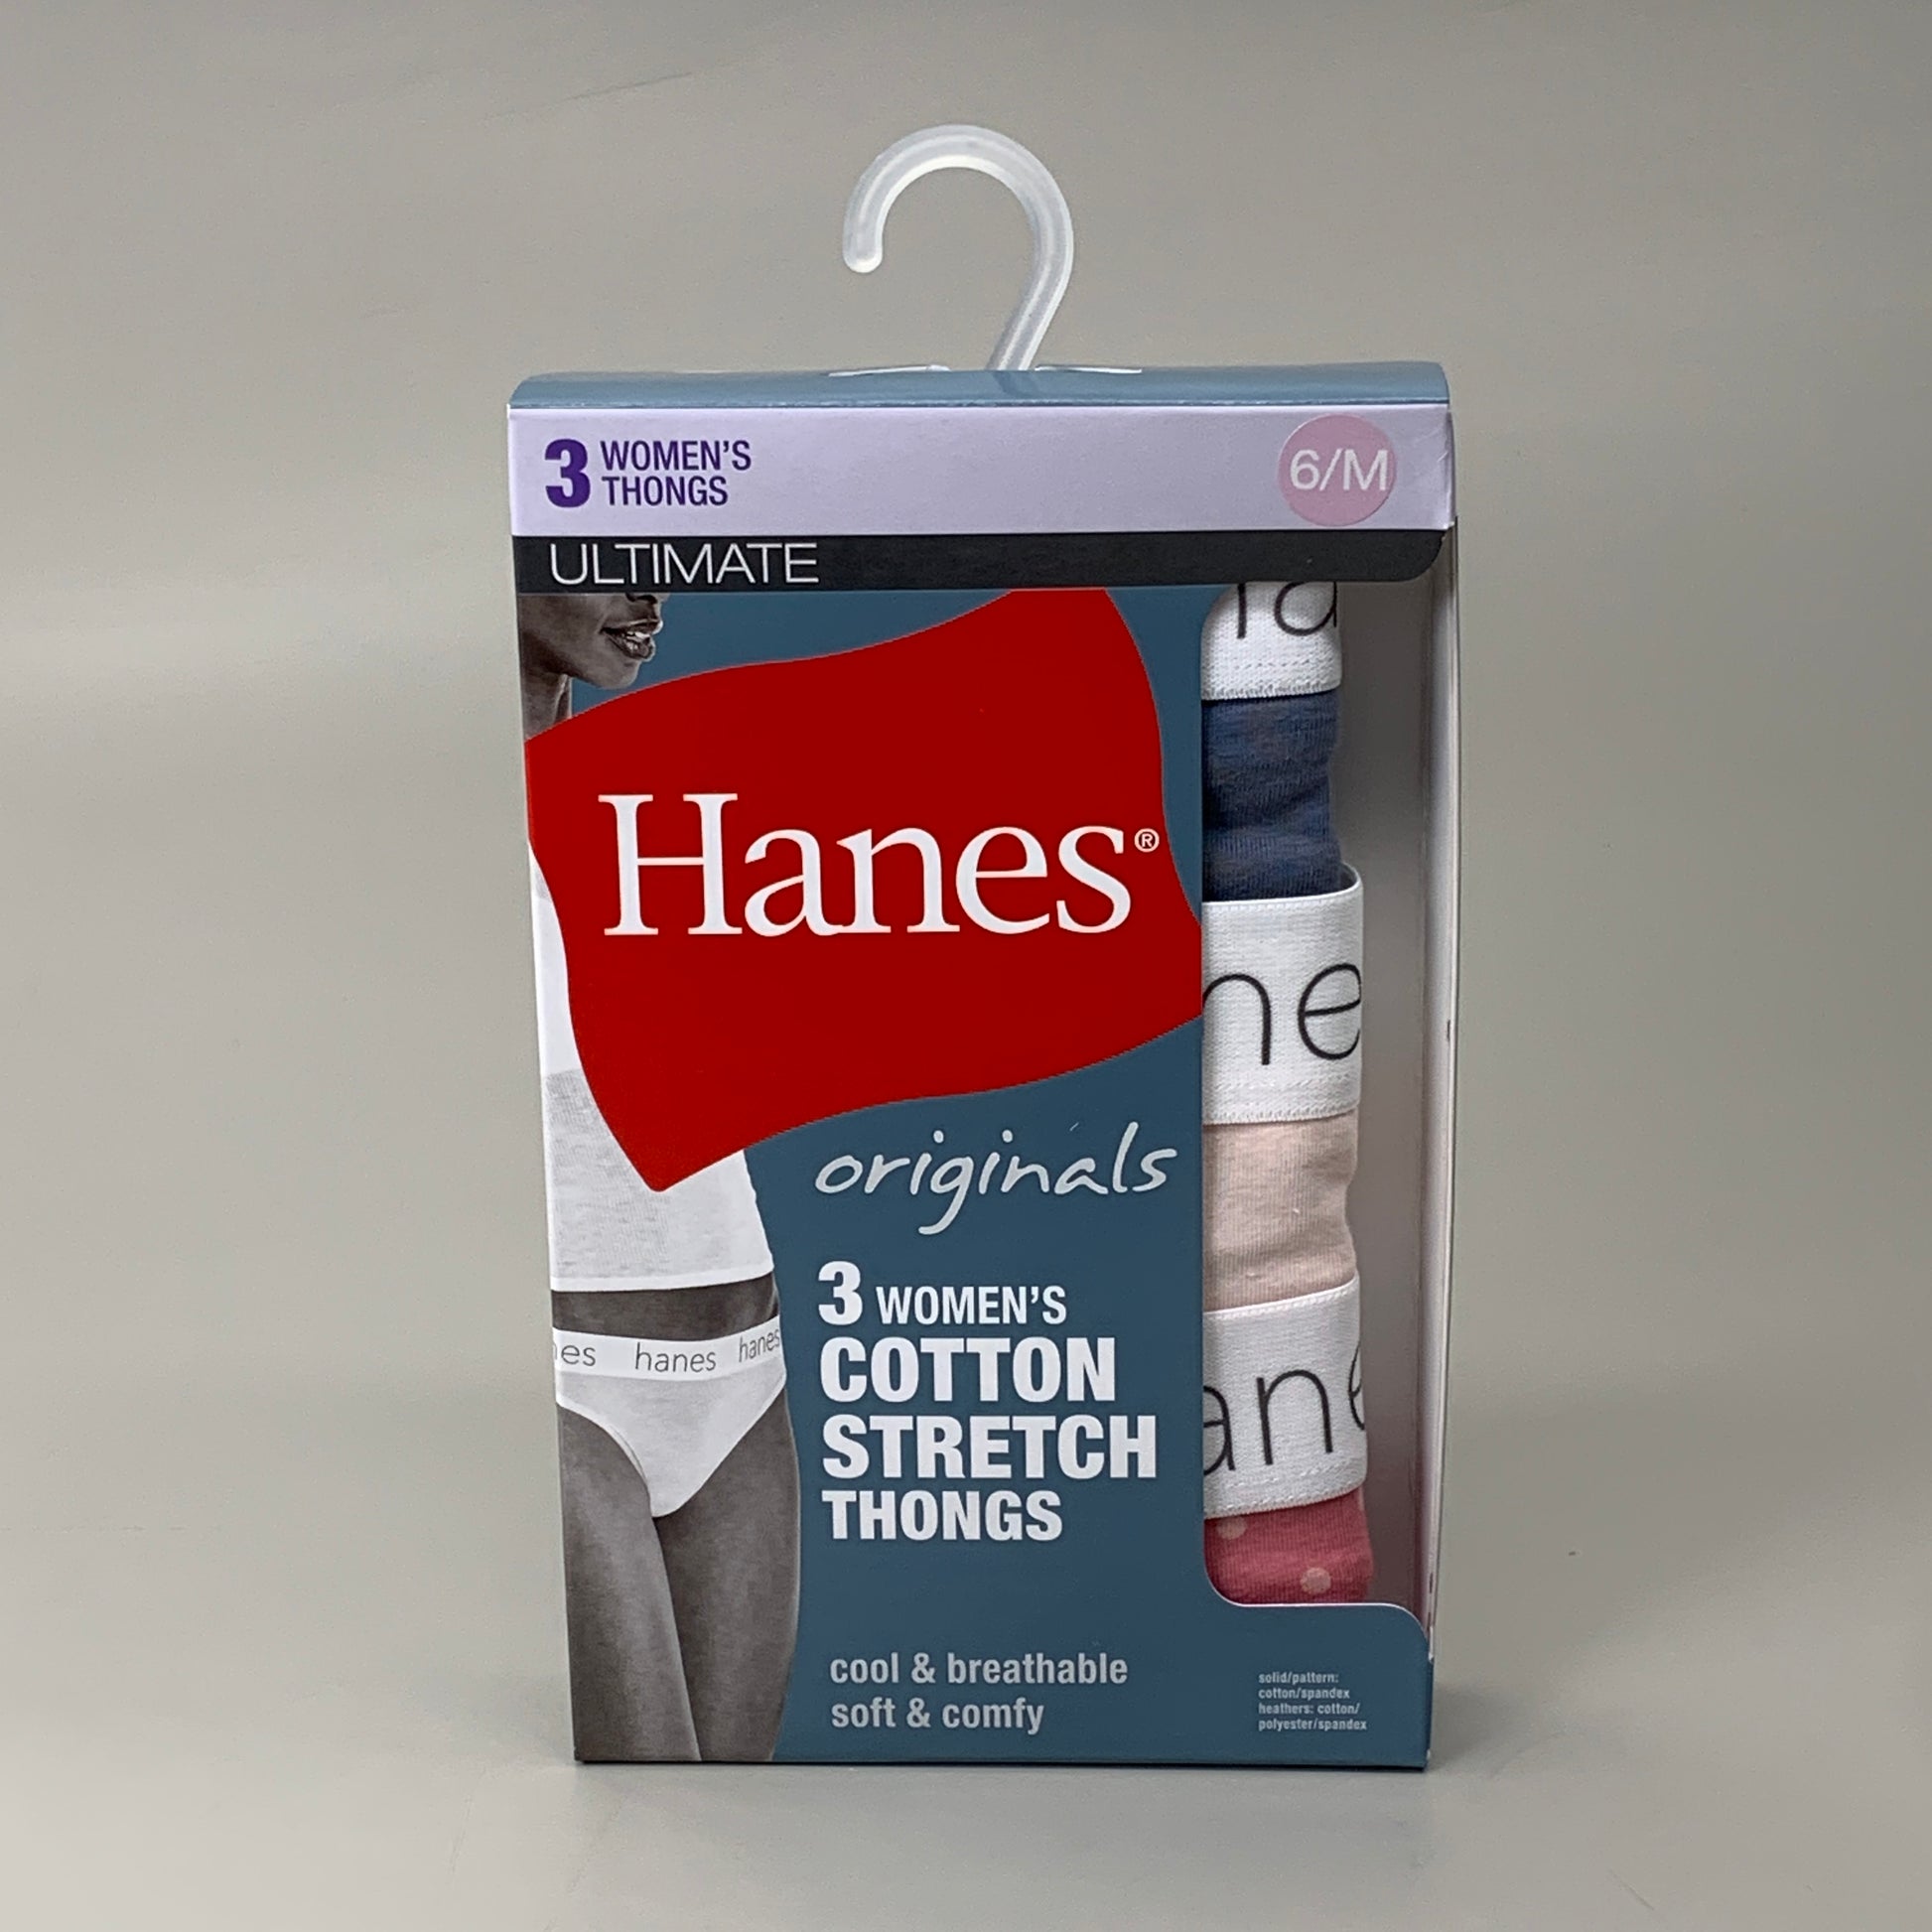 HANES 3 PACK!! Originals Women's Breathable Cotton Stretch Thongs